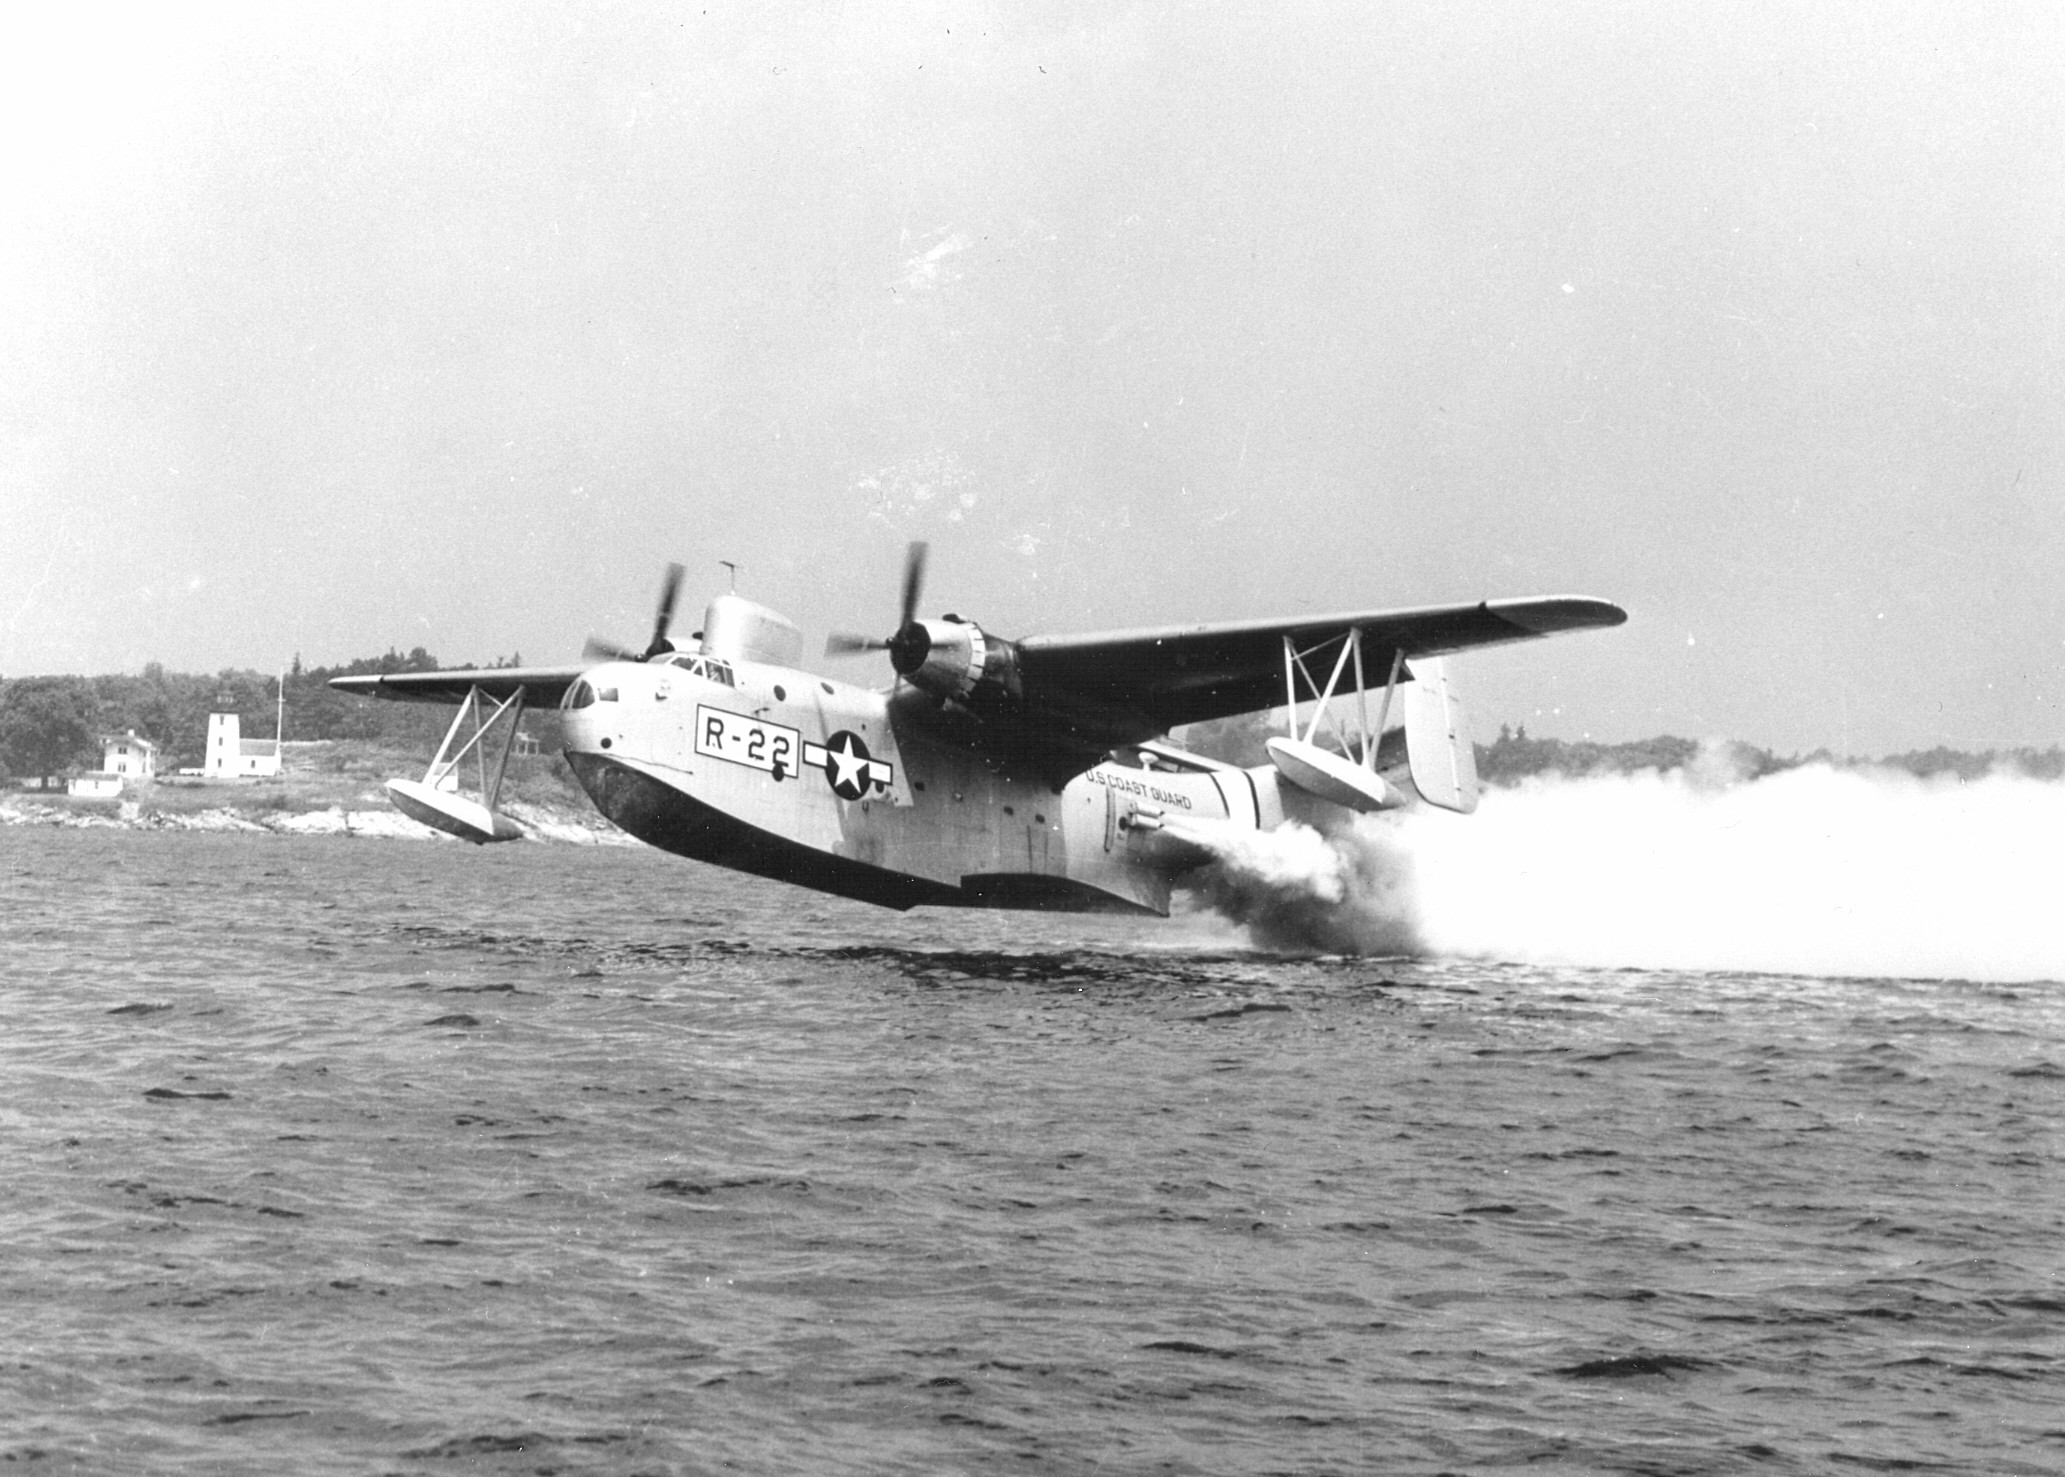 US Coast Guard PBM Mariner aircraft taking off from the water, circa late 1940s